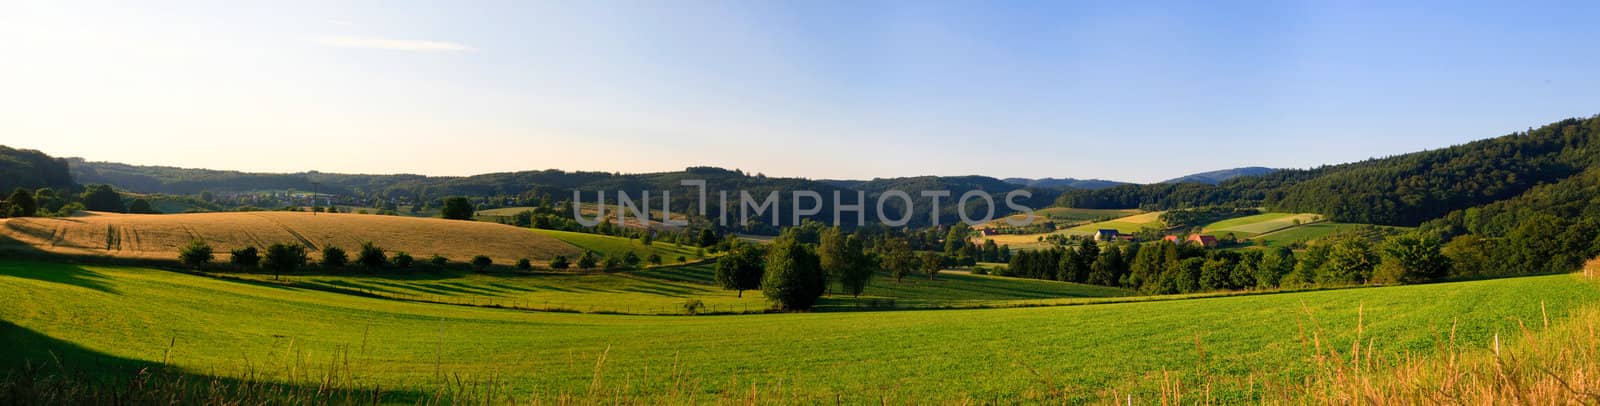 sumer landscape at Germany wiht blue sky and mountain by anobis